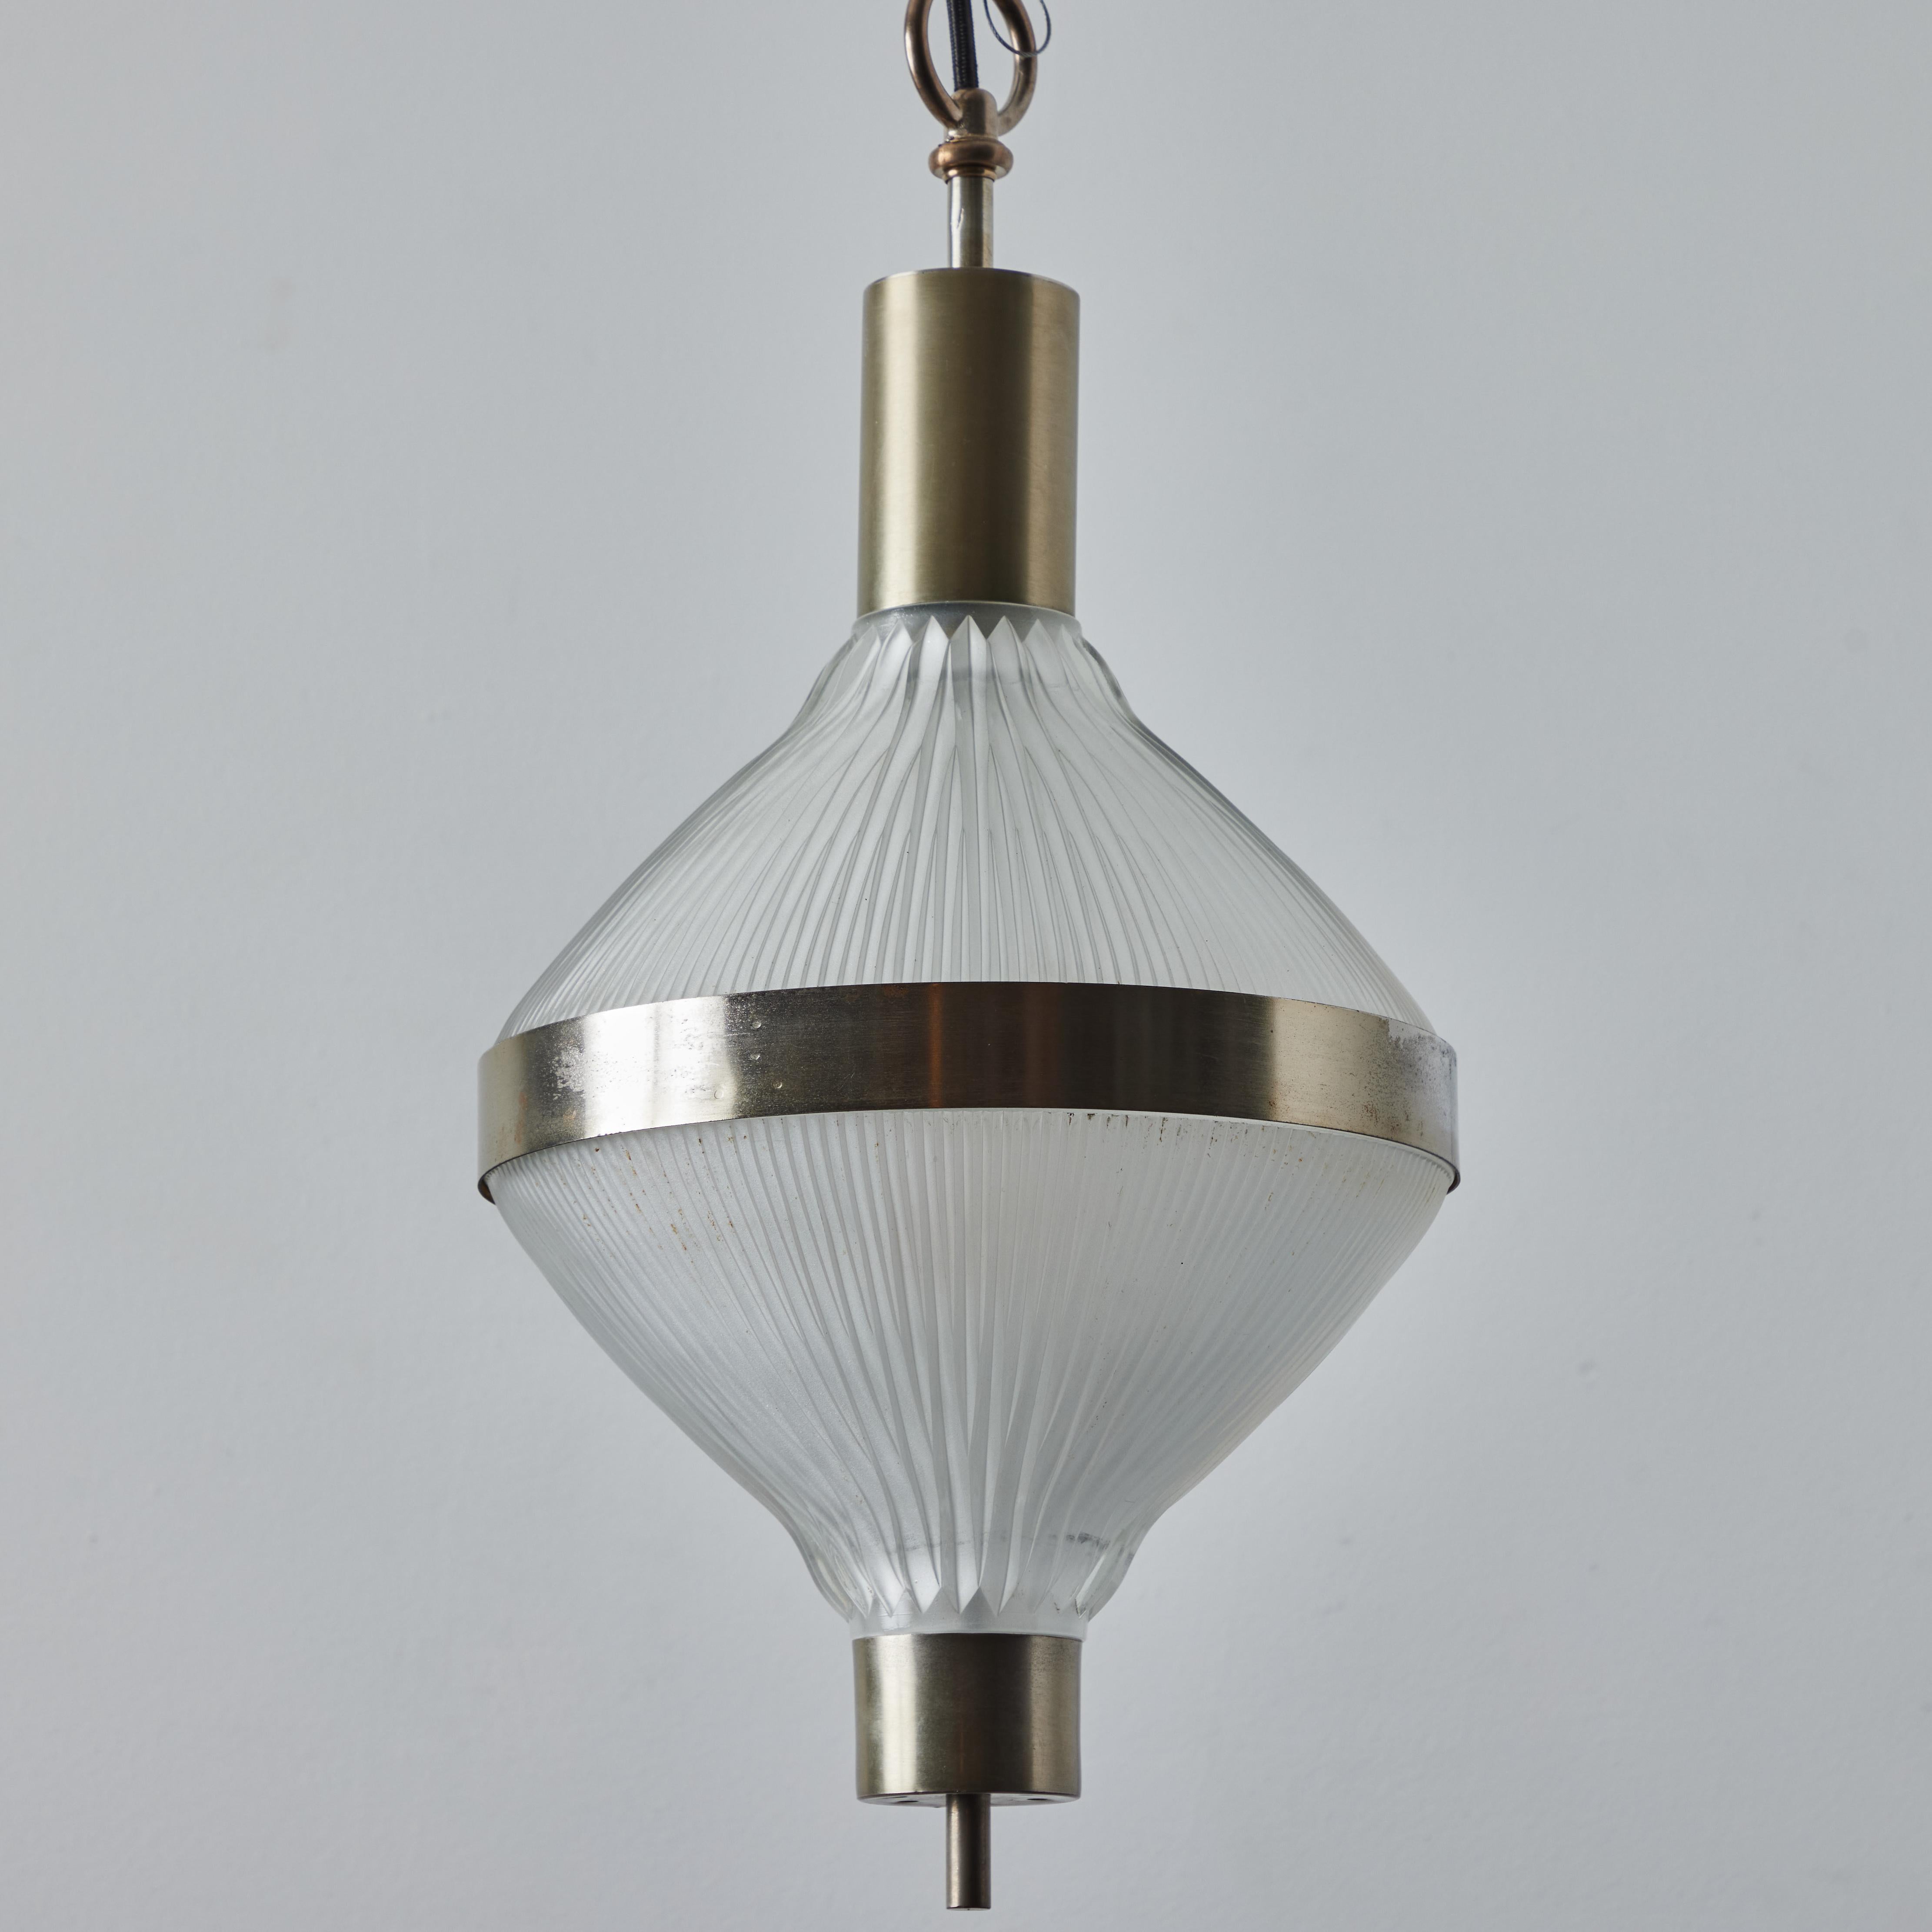 Mid-20th Century Large Studio B.B.P.R 'Polinnia' Glass and Metal Pendant c. 1964 for Artemide For Sale